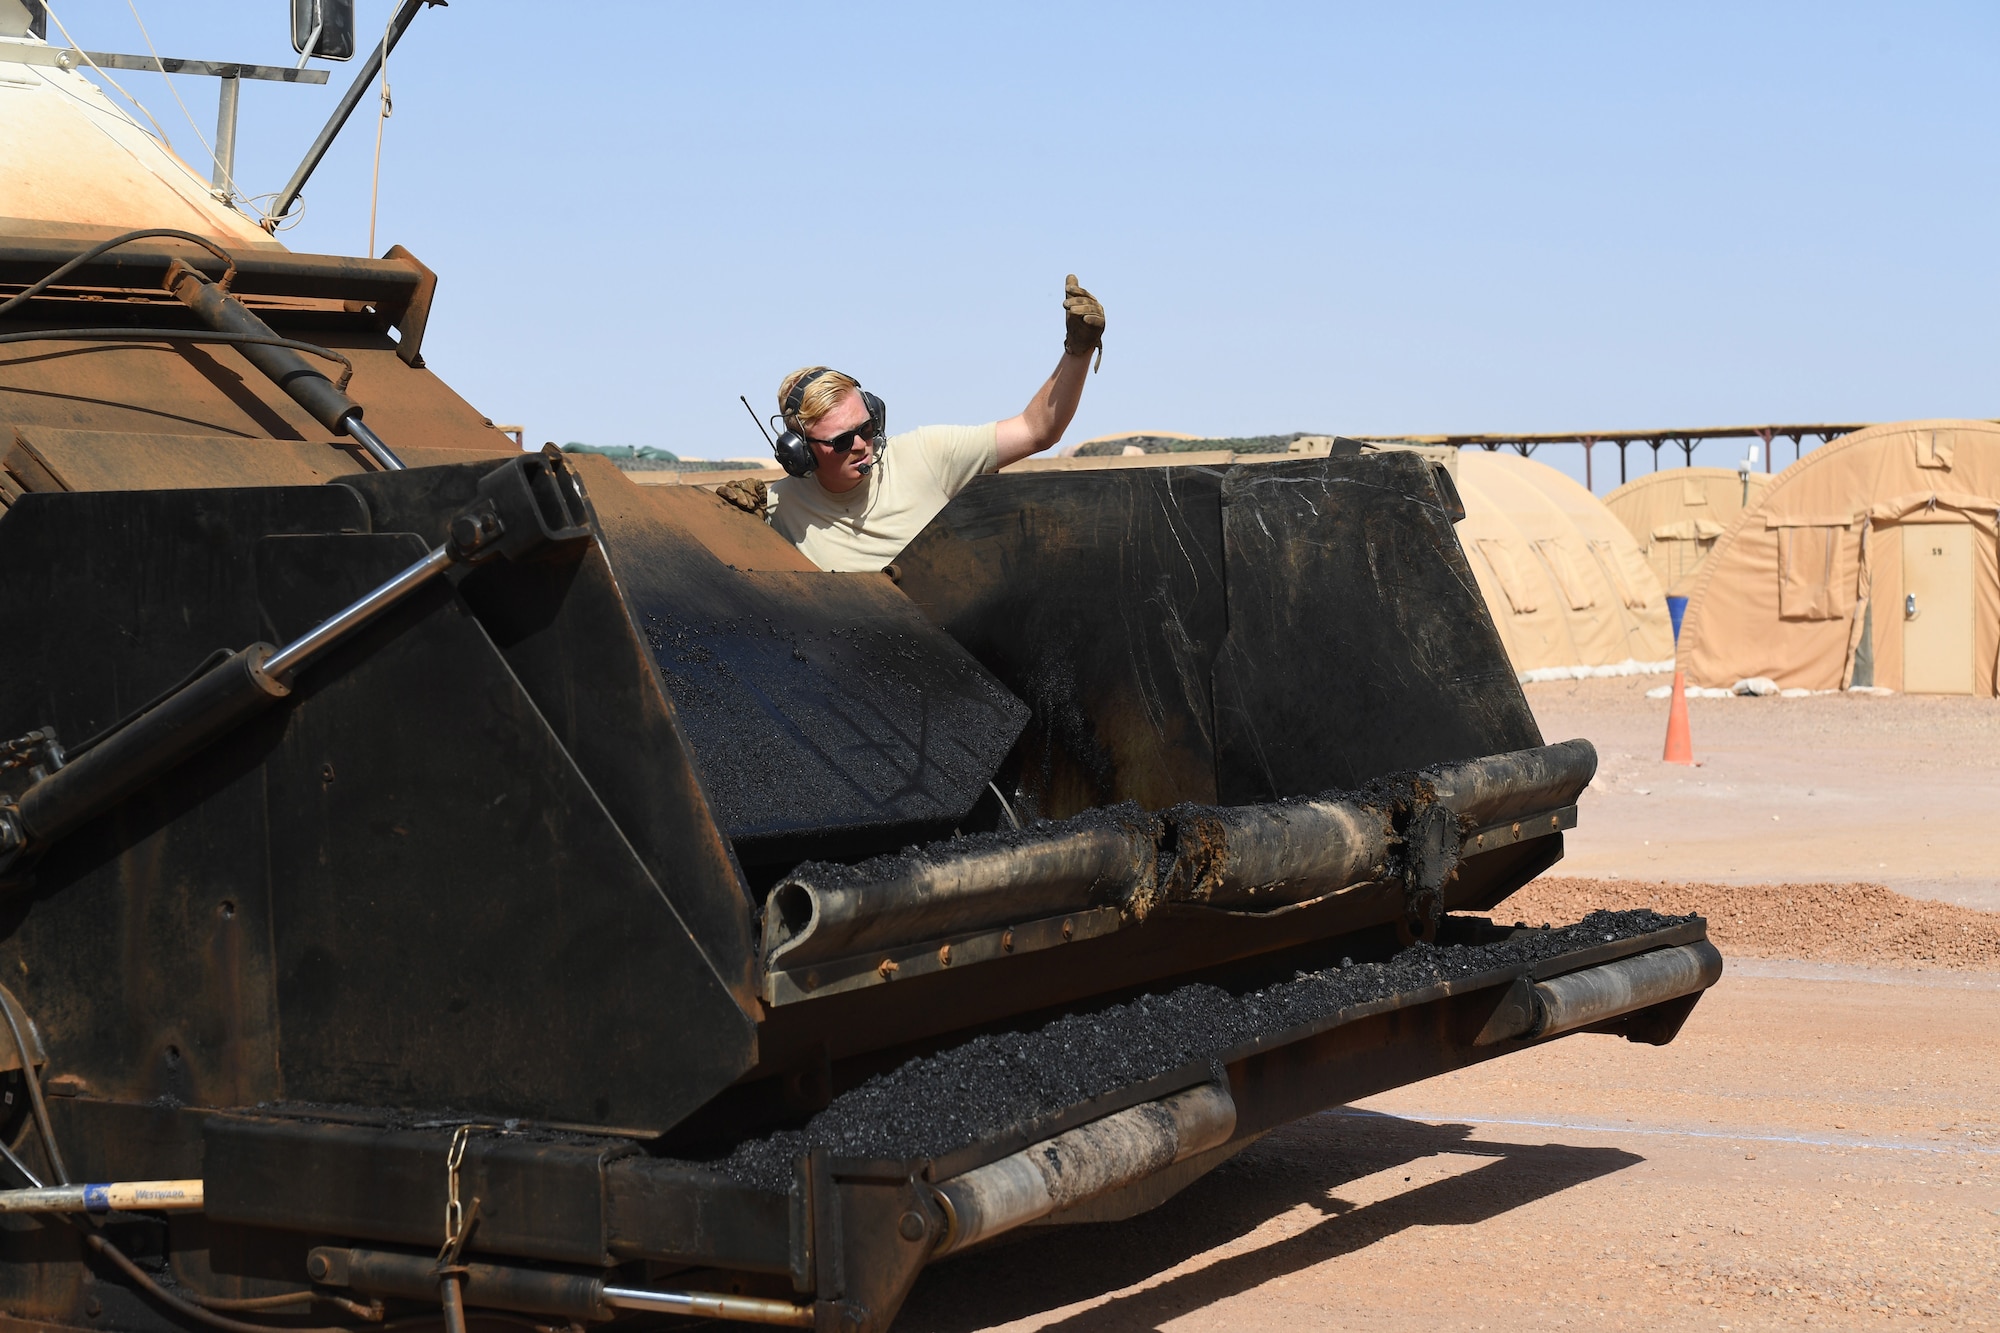 U.S. Air Force Airman 1st Class Conner Roberts, 31st Expeditionary Rapid Engineer Deployable Heavy Operation Repair Squadron Engineer pavement and equipment journeyman, signals to the dump truck to start loading the Material Transfer Vehicle with asphalt at Nigerien Air Base 201, Agadez, Niger, Oct. 19, 2018. The MTV allows Airmen to pave continuously with well-mixed asphalt. (U.S. Air Force photo by Tech. Sgt. Rachelle Coleman)